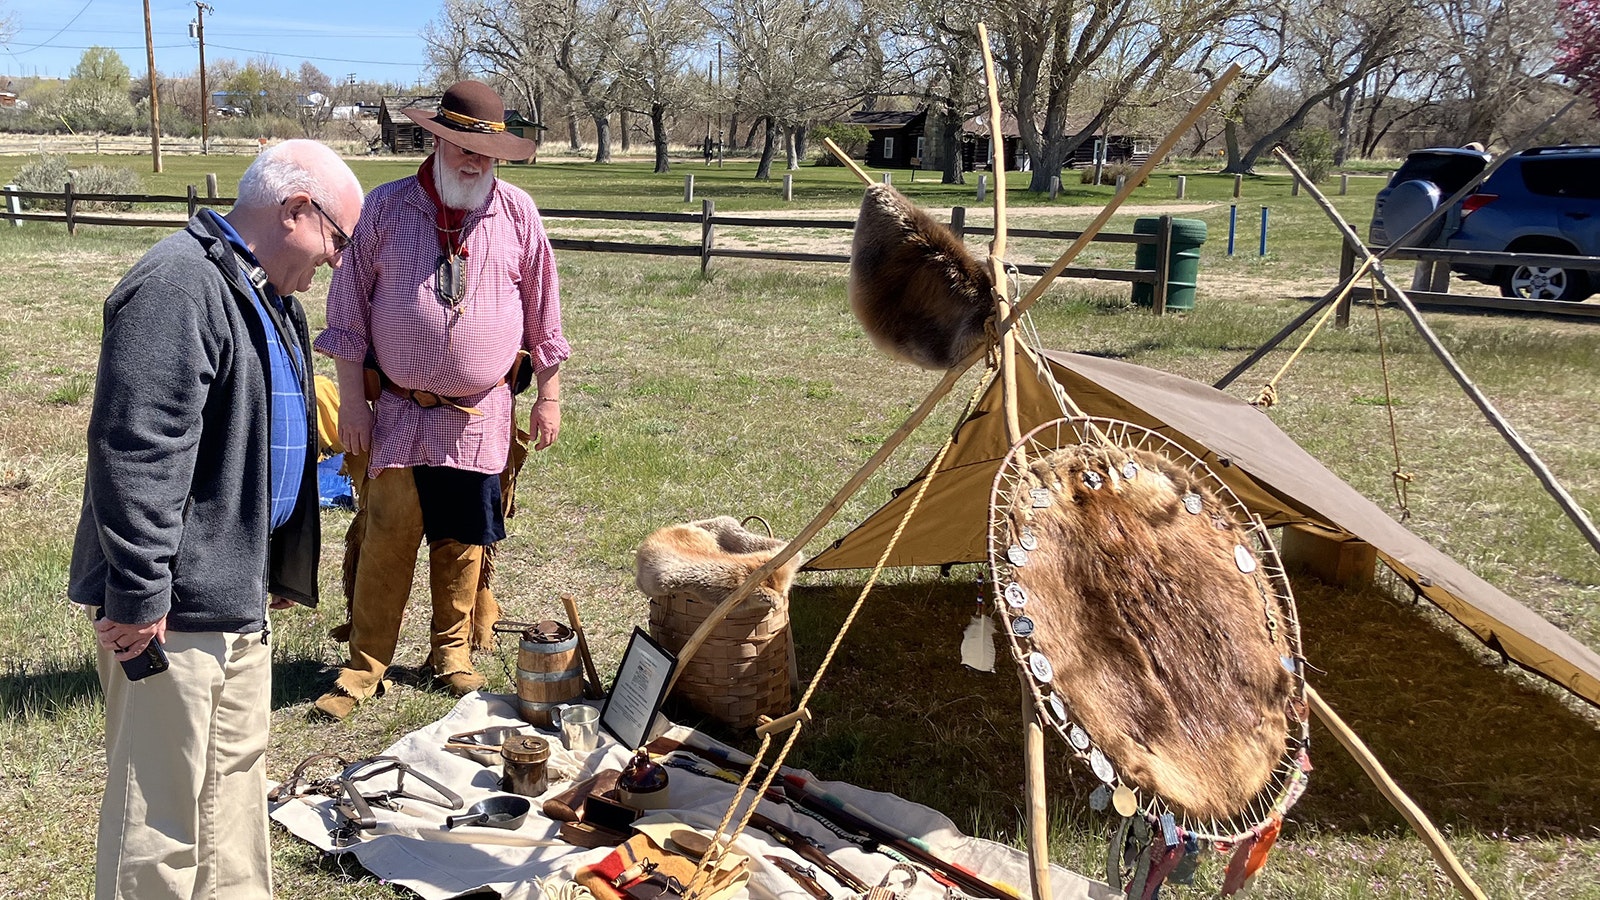 Casper’s Dale Gregory explains his mountain man camp to a visitor at Fort Caspar.